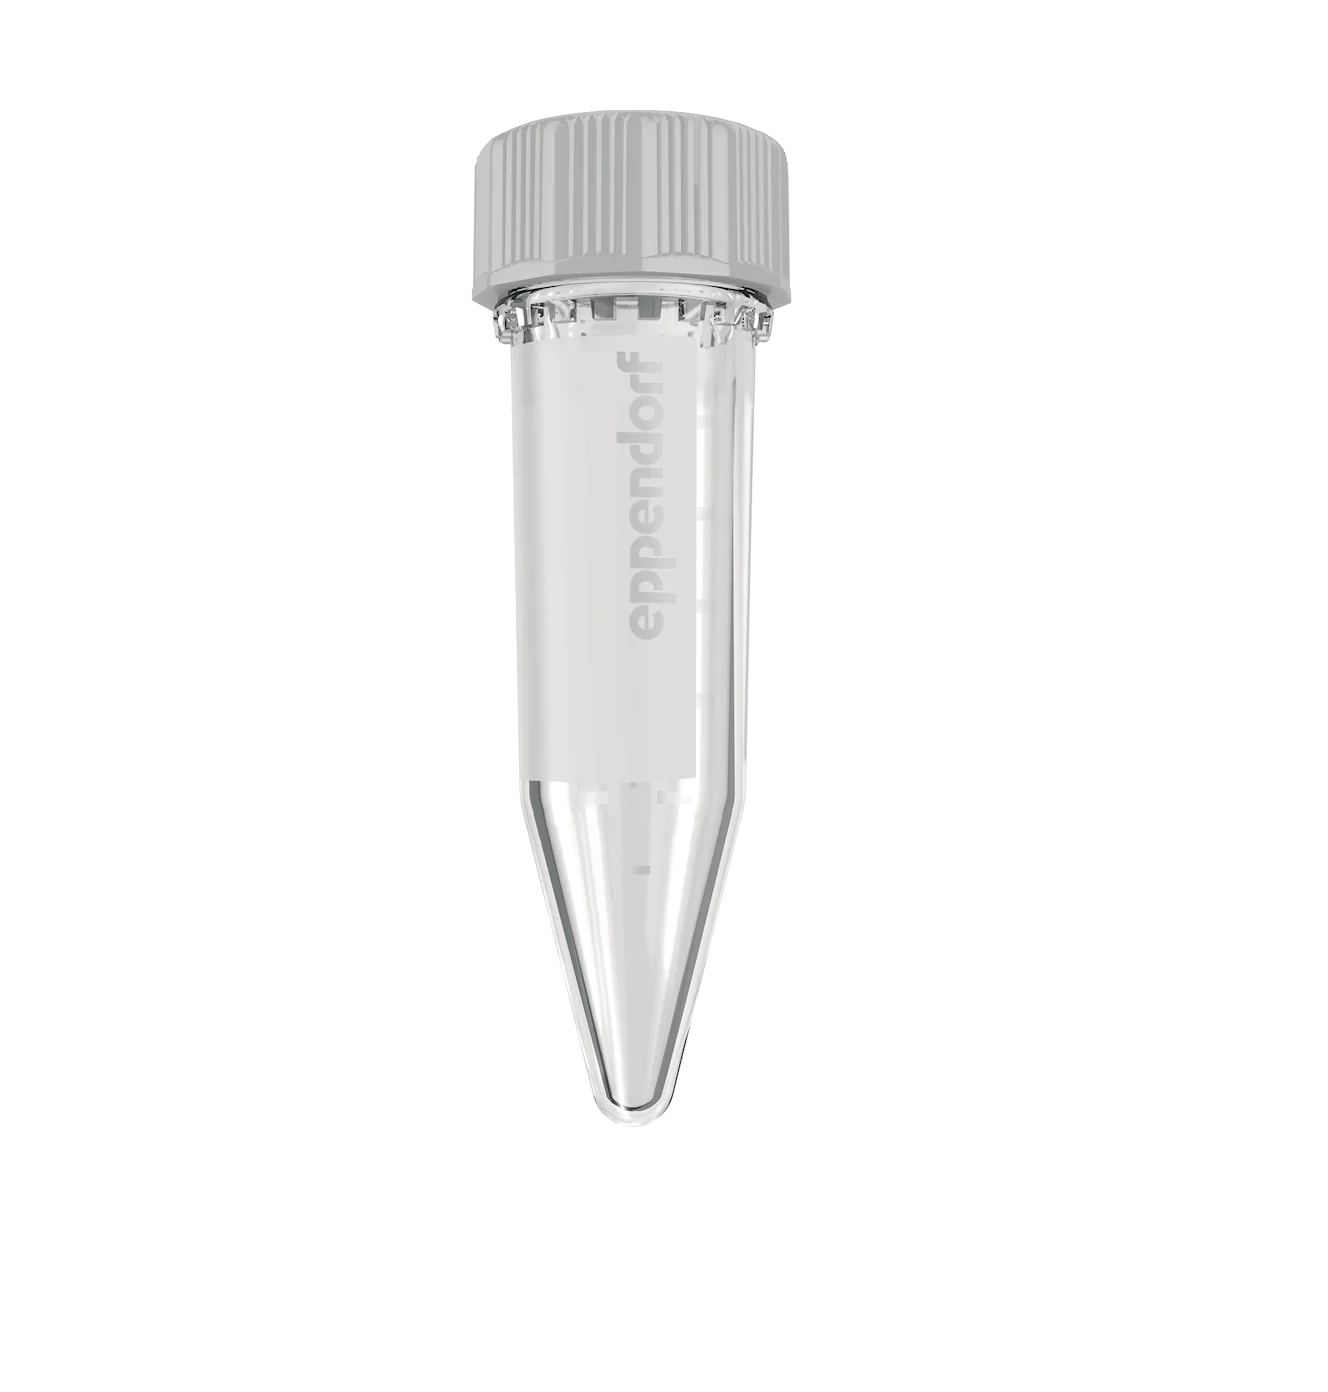 Eppendorf Tubes® 5.0 mL with screw cap, 5.0 mL, PCR clean, colorless, 200 tubes (2 bags × 100 tubes)